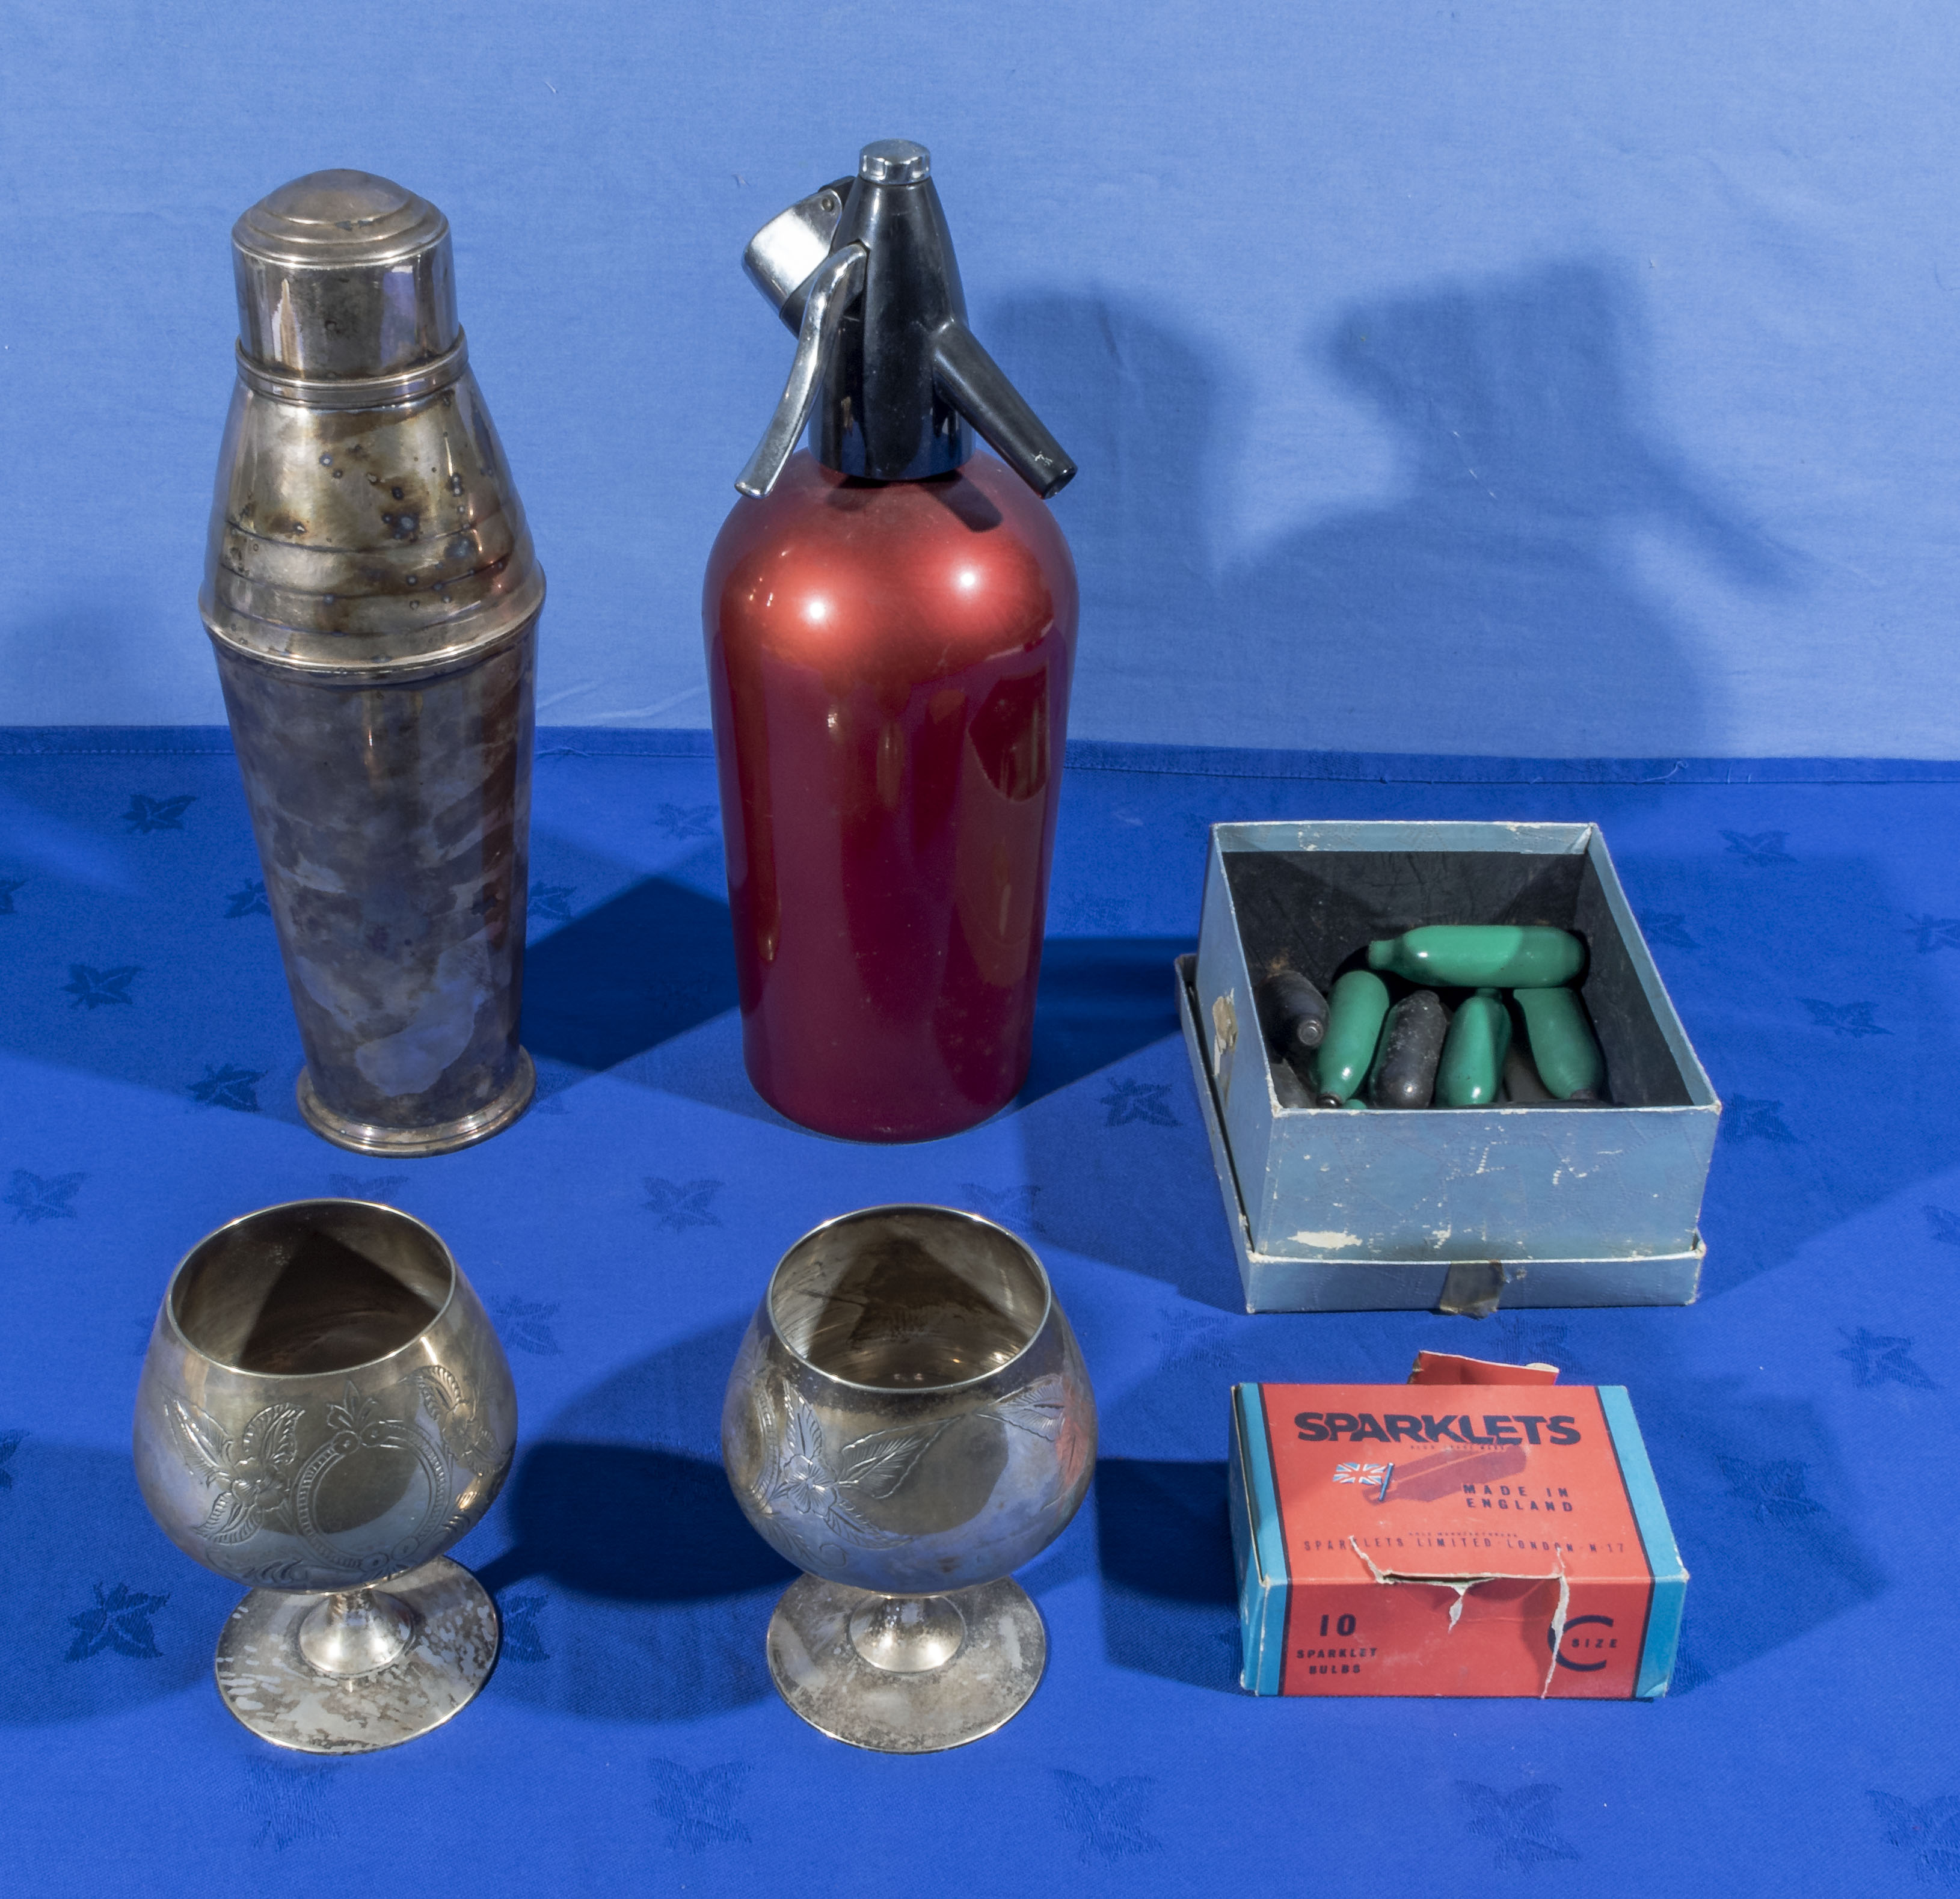 A vintage sparklets soda syphon and bulbs, cocktail shaker and two goblets